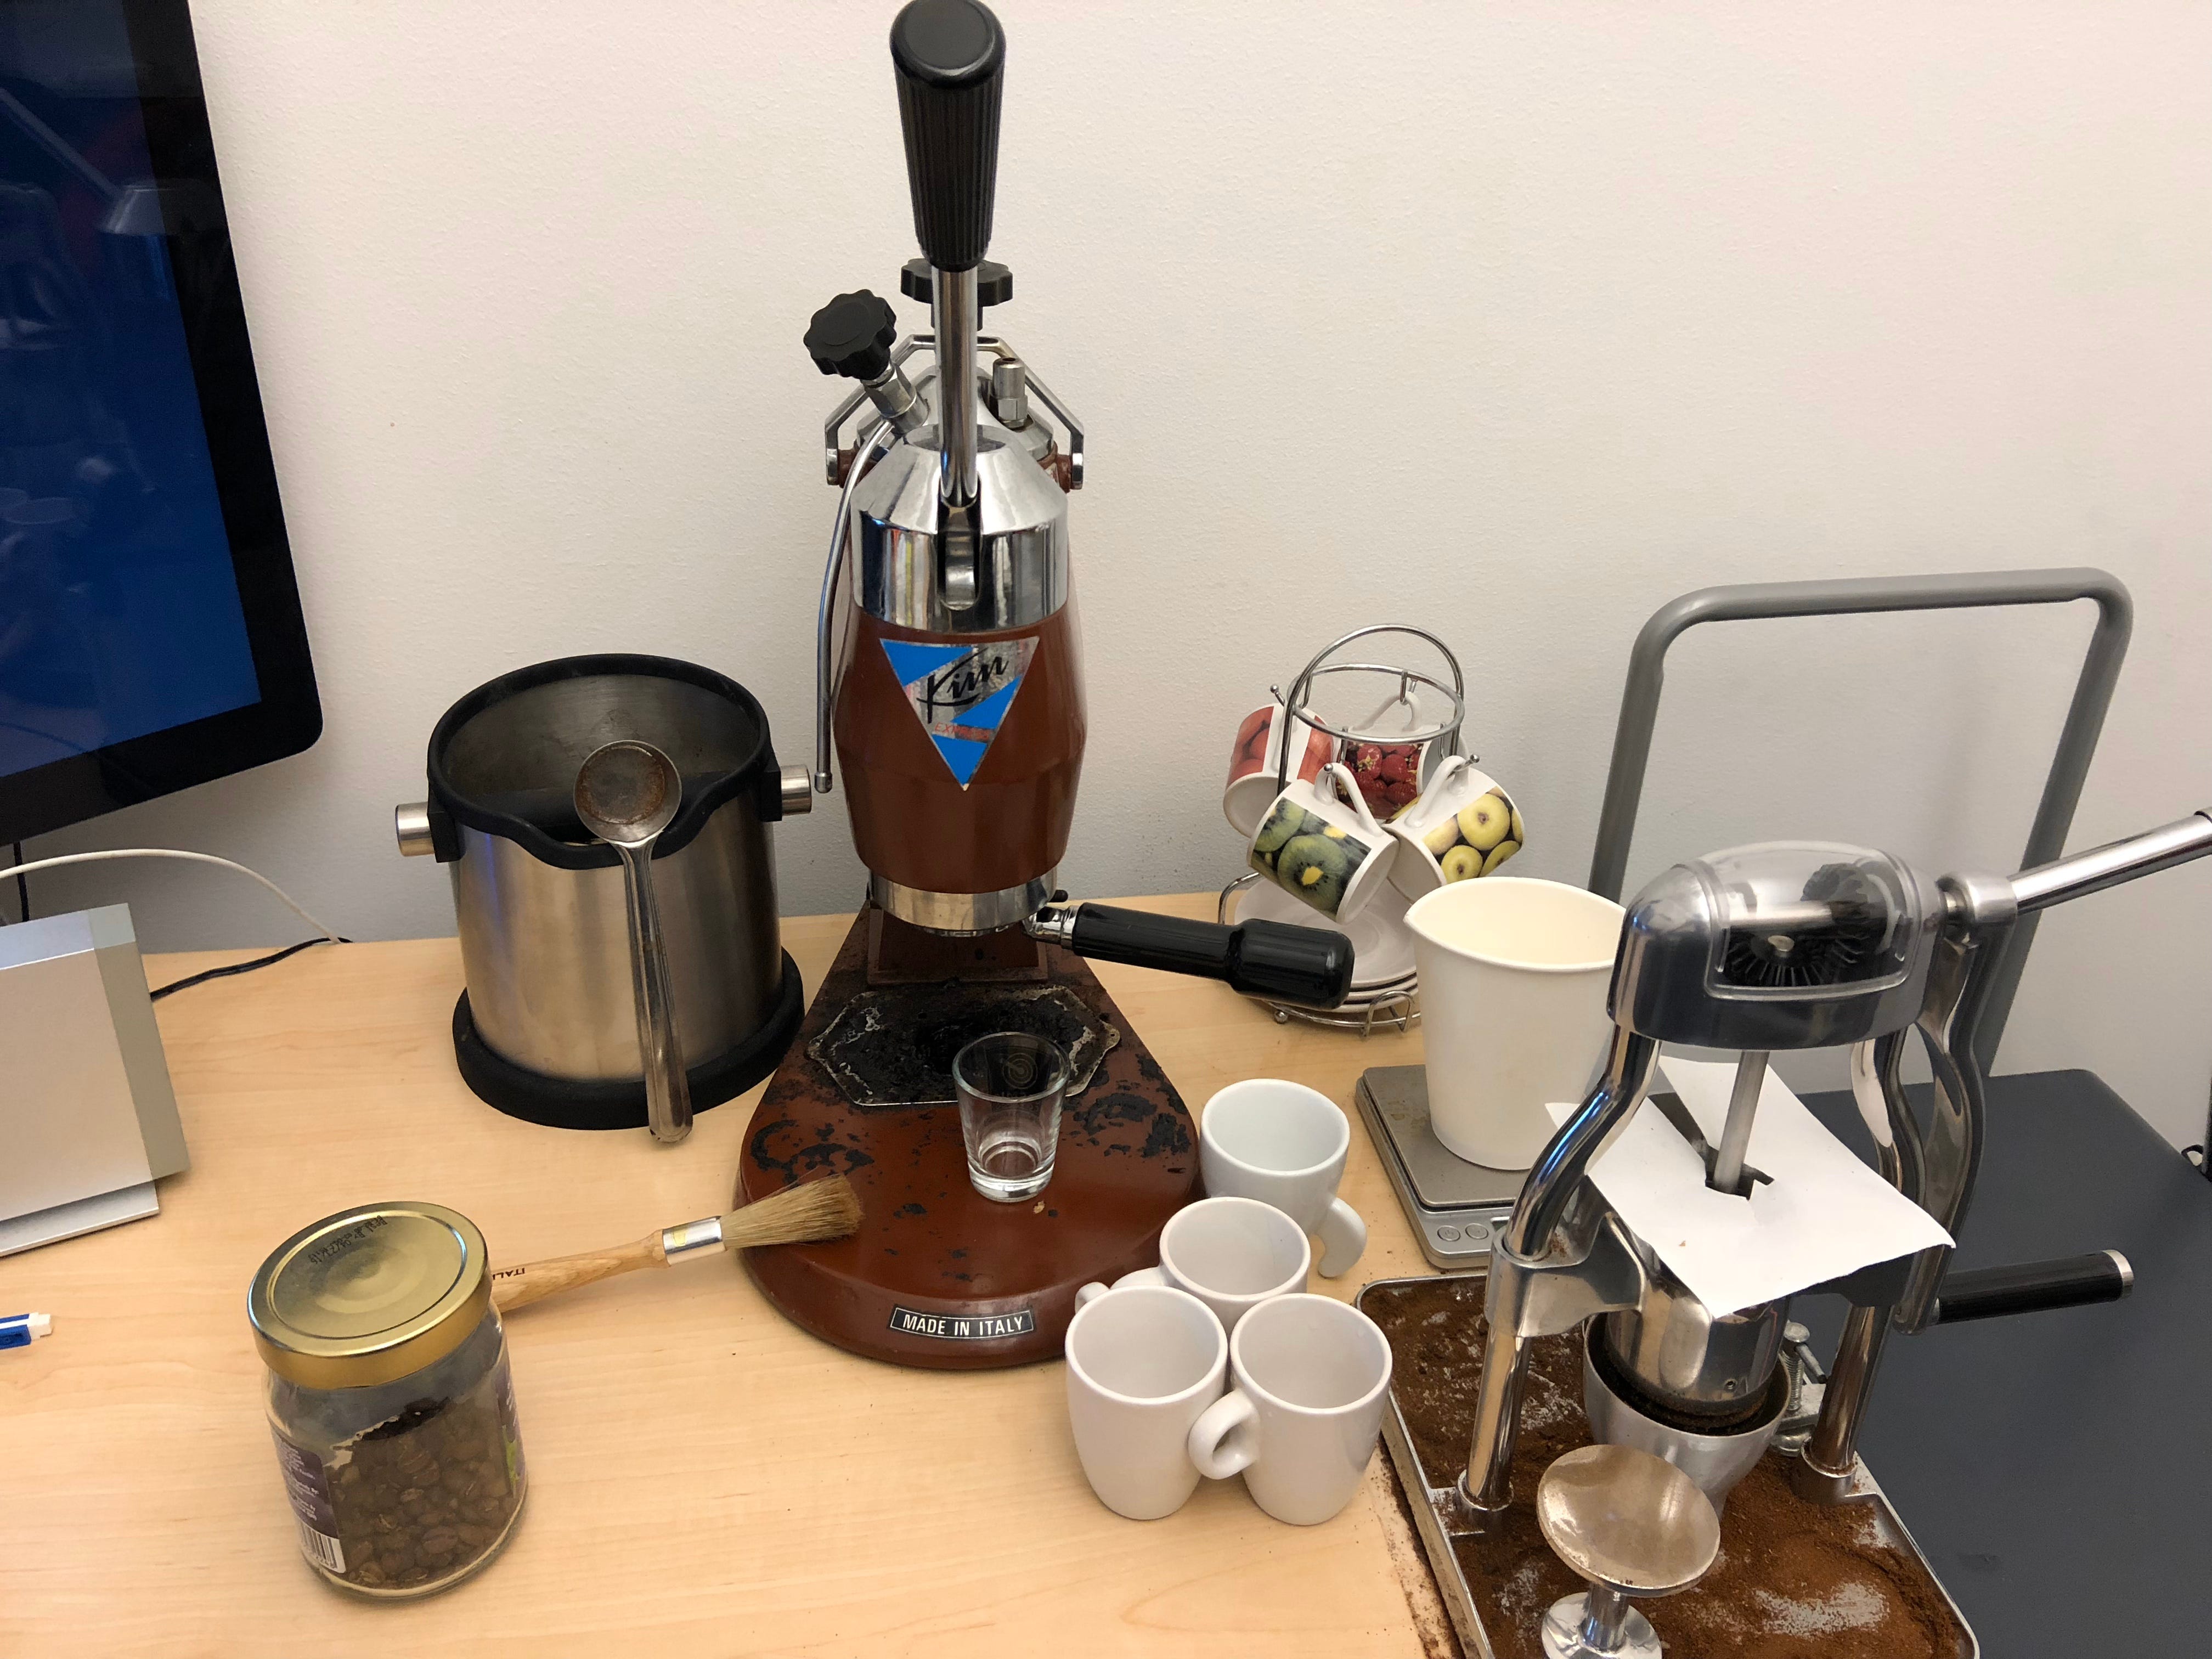 Evaluating the Kruve EQ Cup for Espresso, by Robert McKeon Aloe